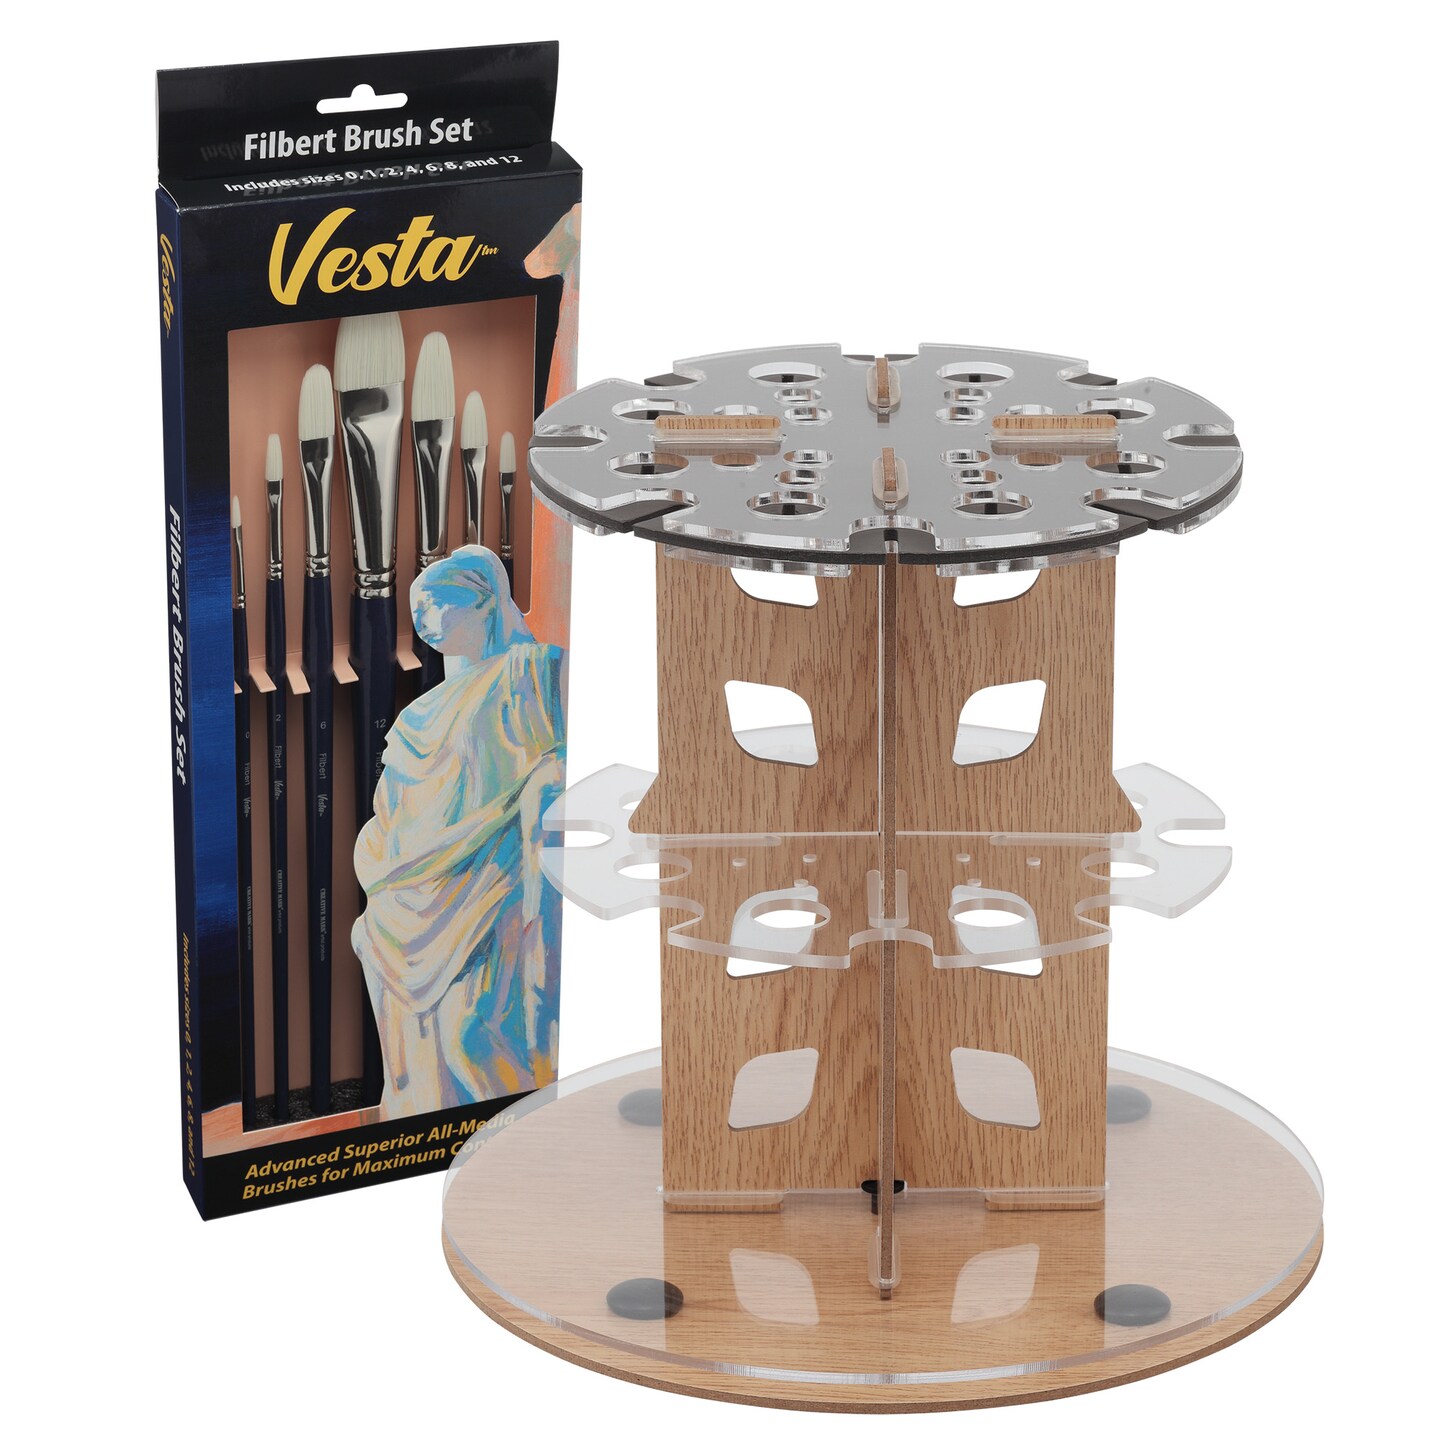 Mezzo Rotating Paint Brush Storage Rack with Vesta Synthetic Artist Paint Brushes for Acrylic Painting - Filbert Acrylic Paint Brush Set of 7 - with Brush Drying Carousel - Holds Up to 28 Brushes